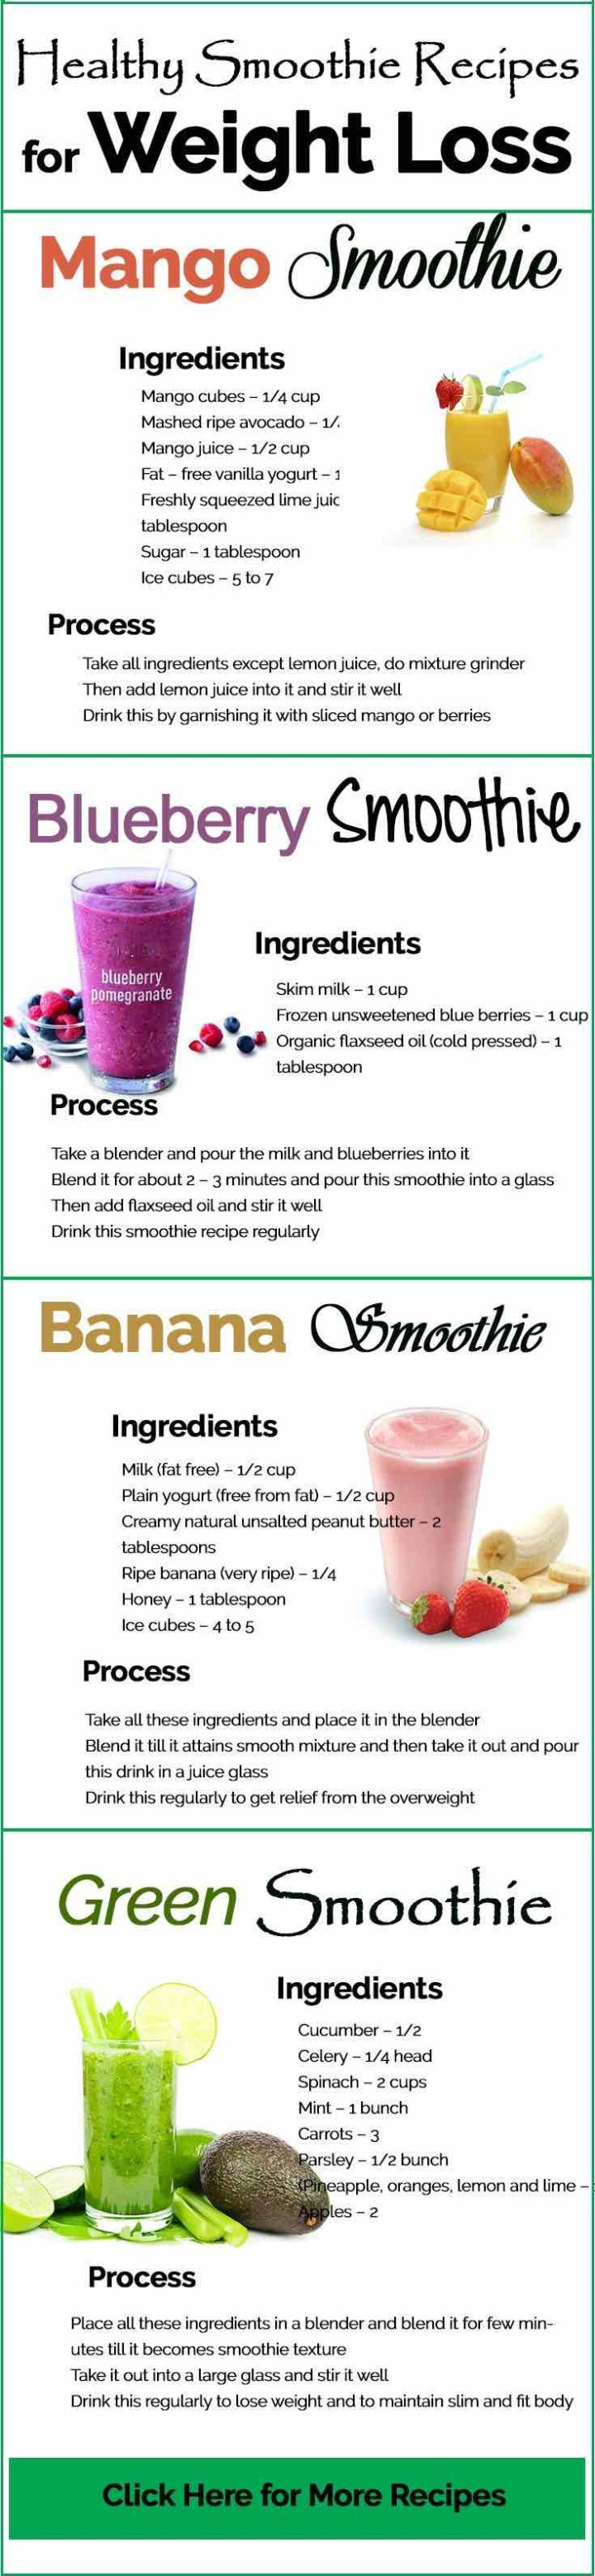 Easy Healthy Smoothie Recipes For Weight Loss
 Juicing Recipes for Detoxing and Weight Loss MODwedding